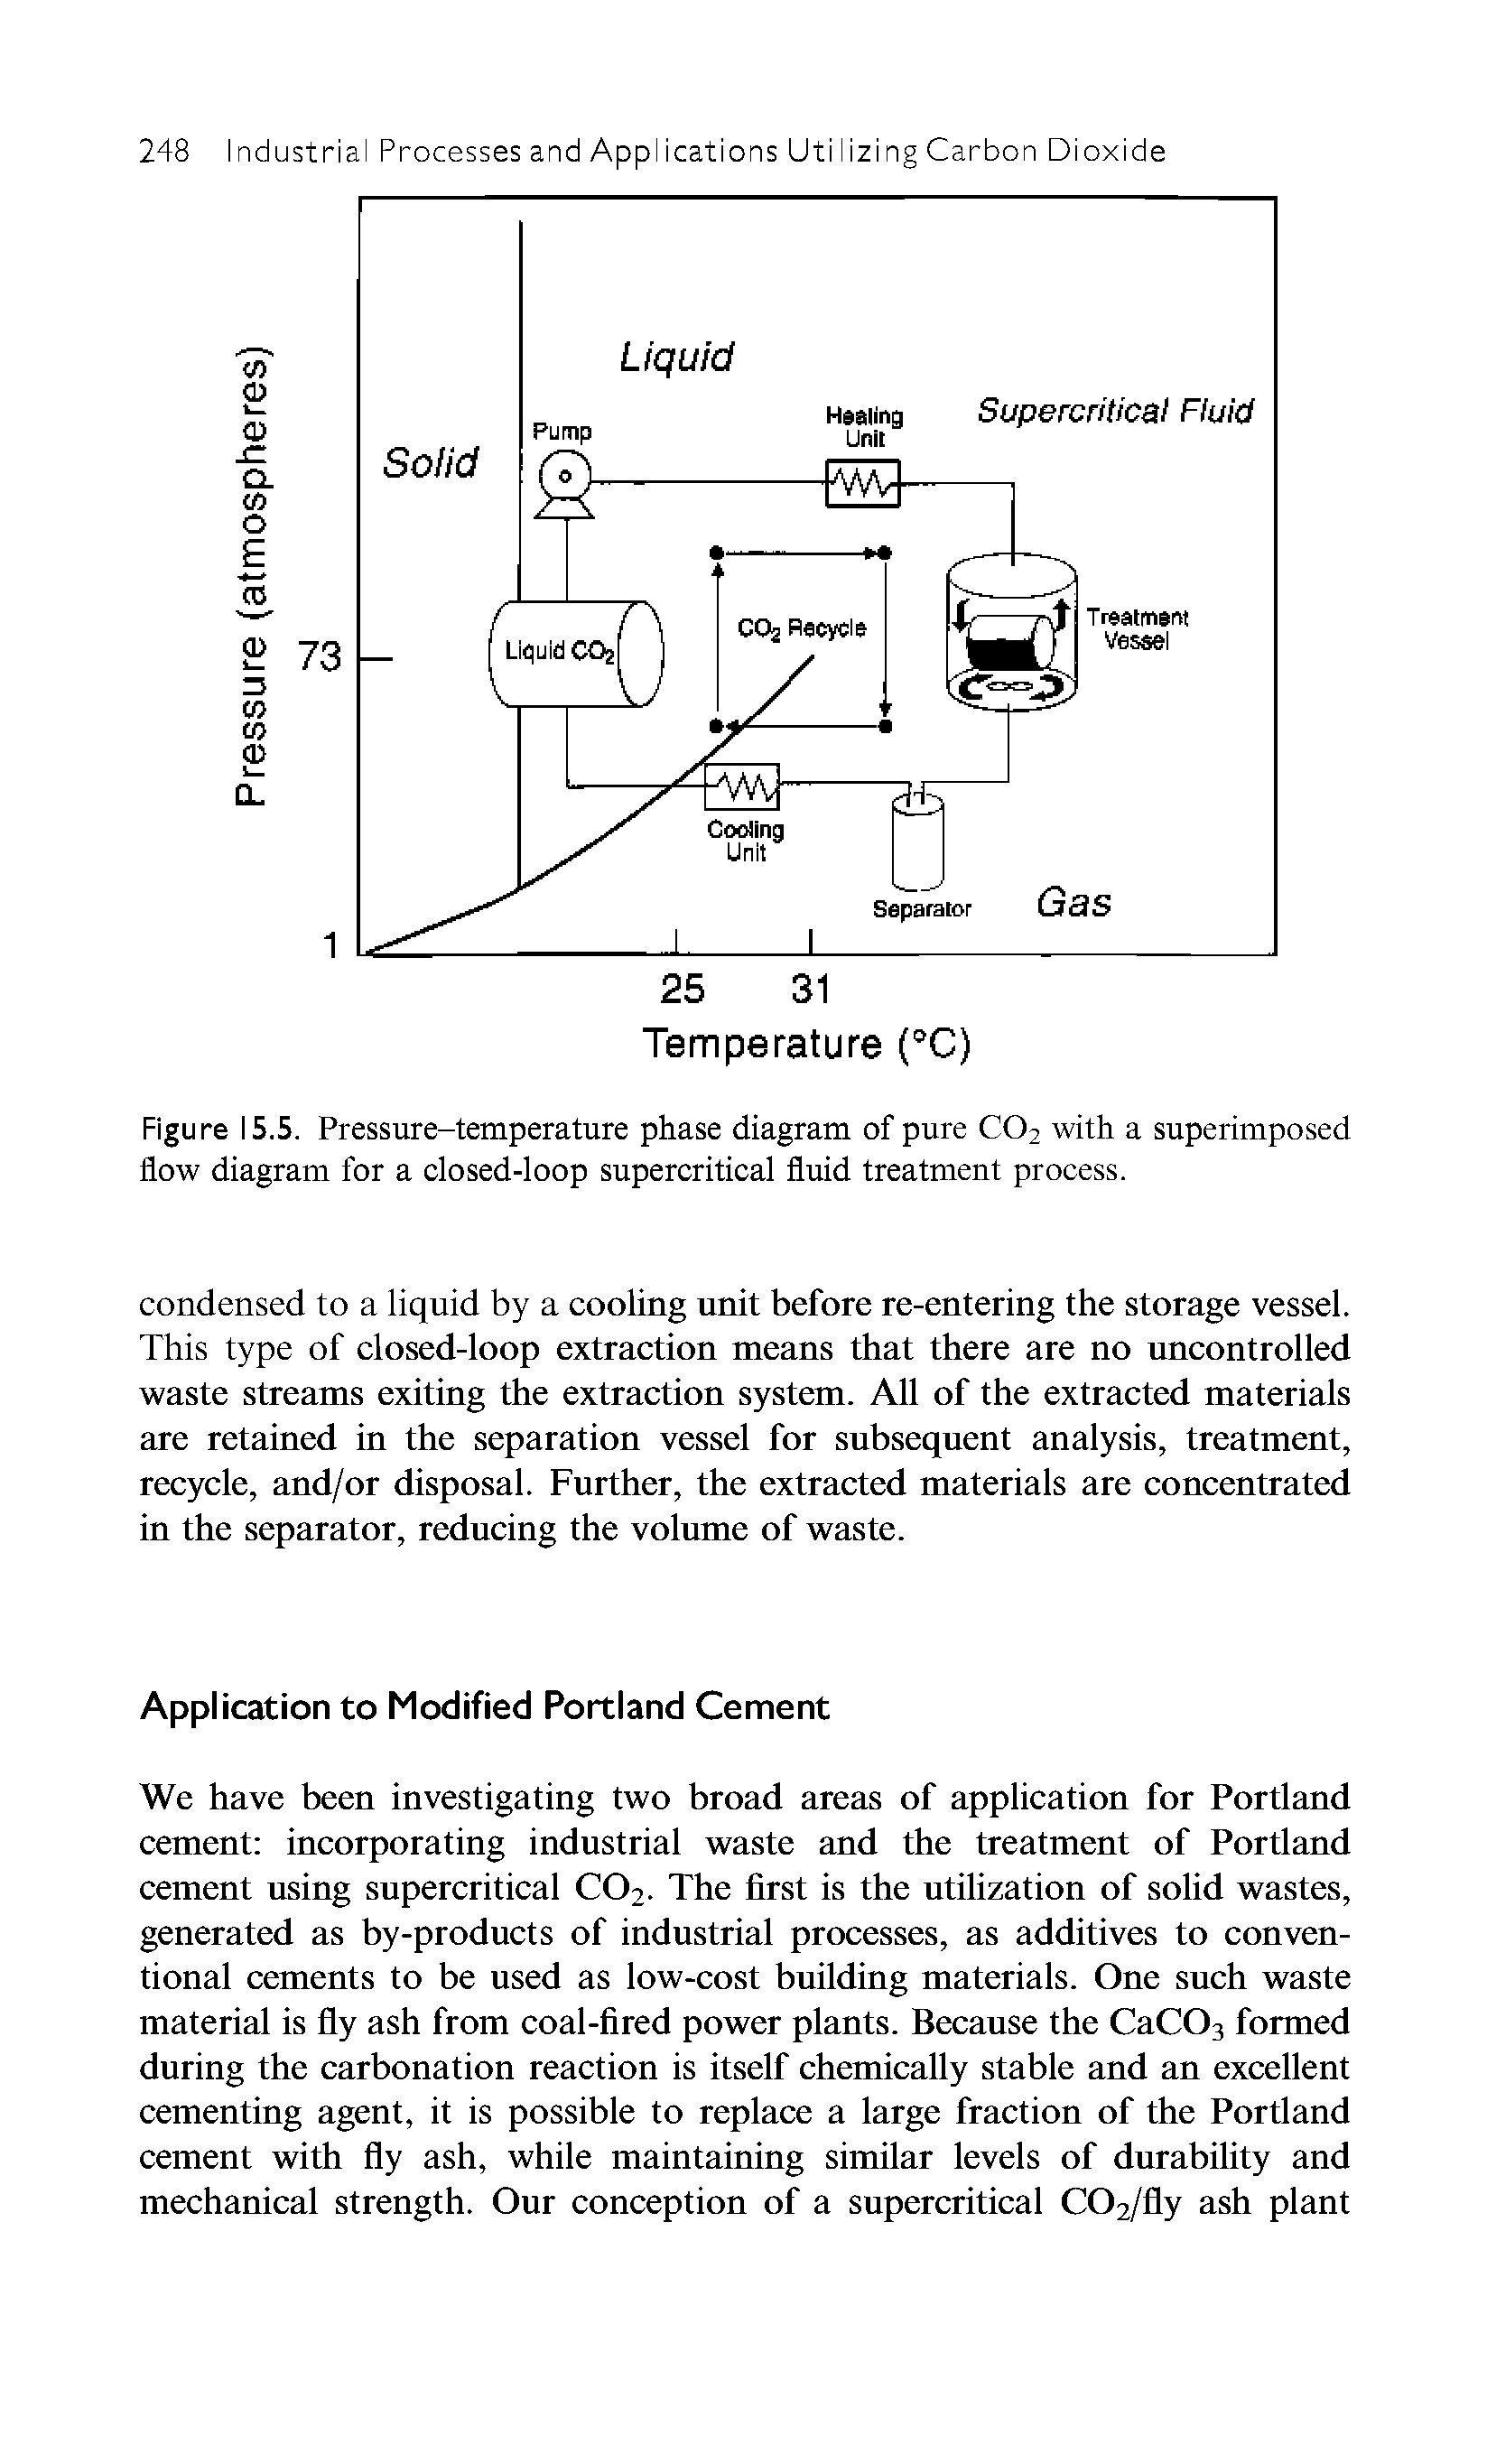 Figure 15.5. Pressure-temperature phase diagram of pure C02 with a superimposed flow diagram for a closed-loop supercritical fluid treatment process.